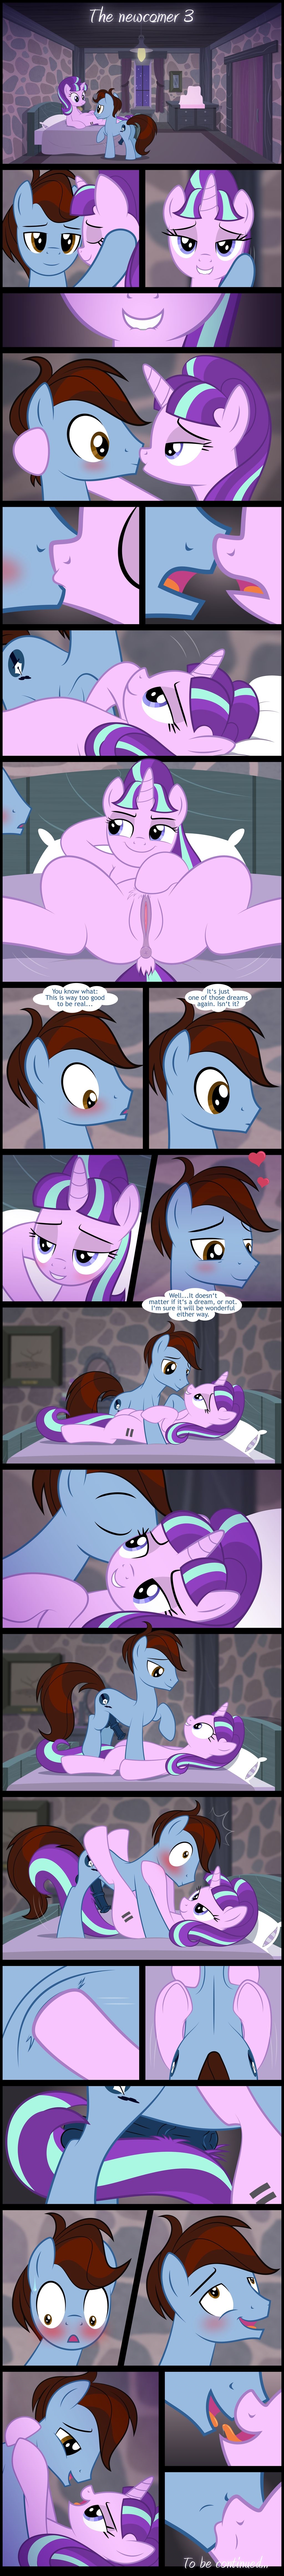 [Culu-Bluebeaver] The Newcomer (My Little Pony: Friendship is Magic) 3